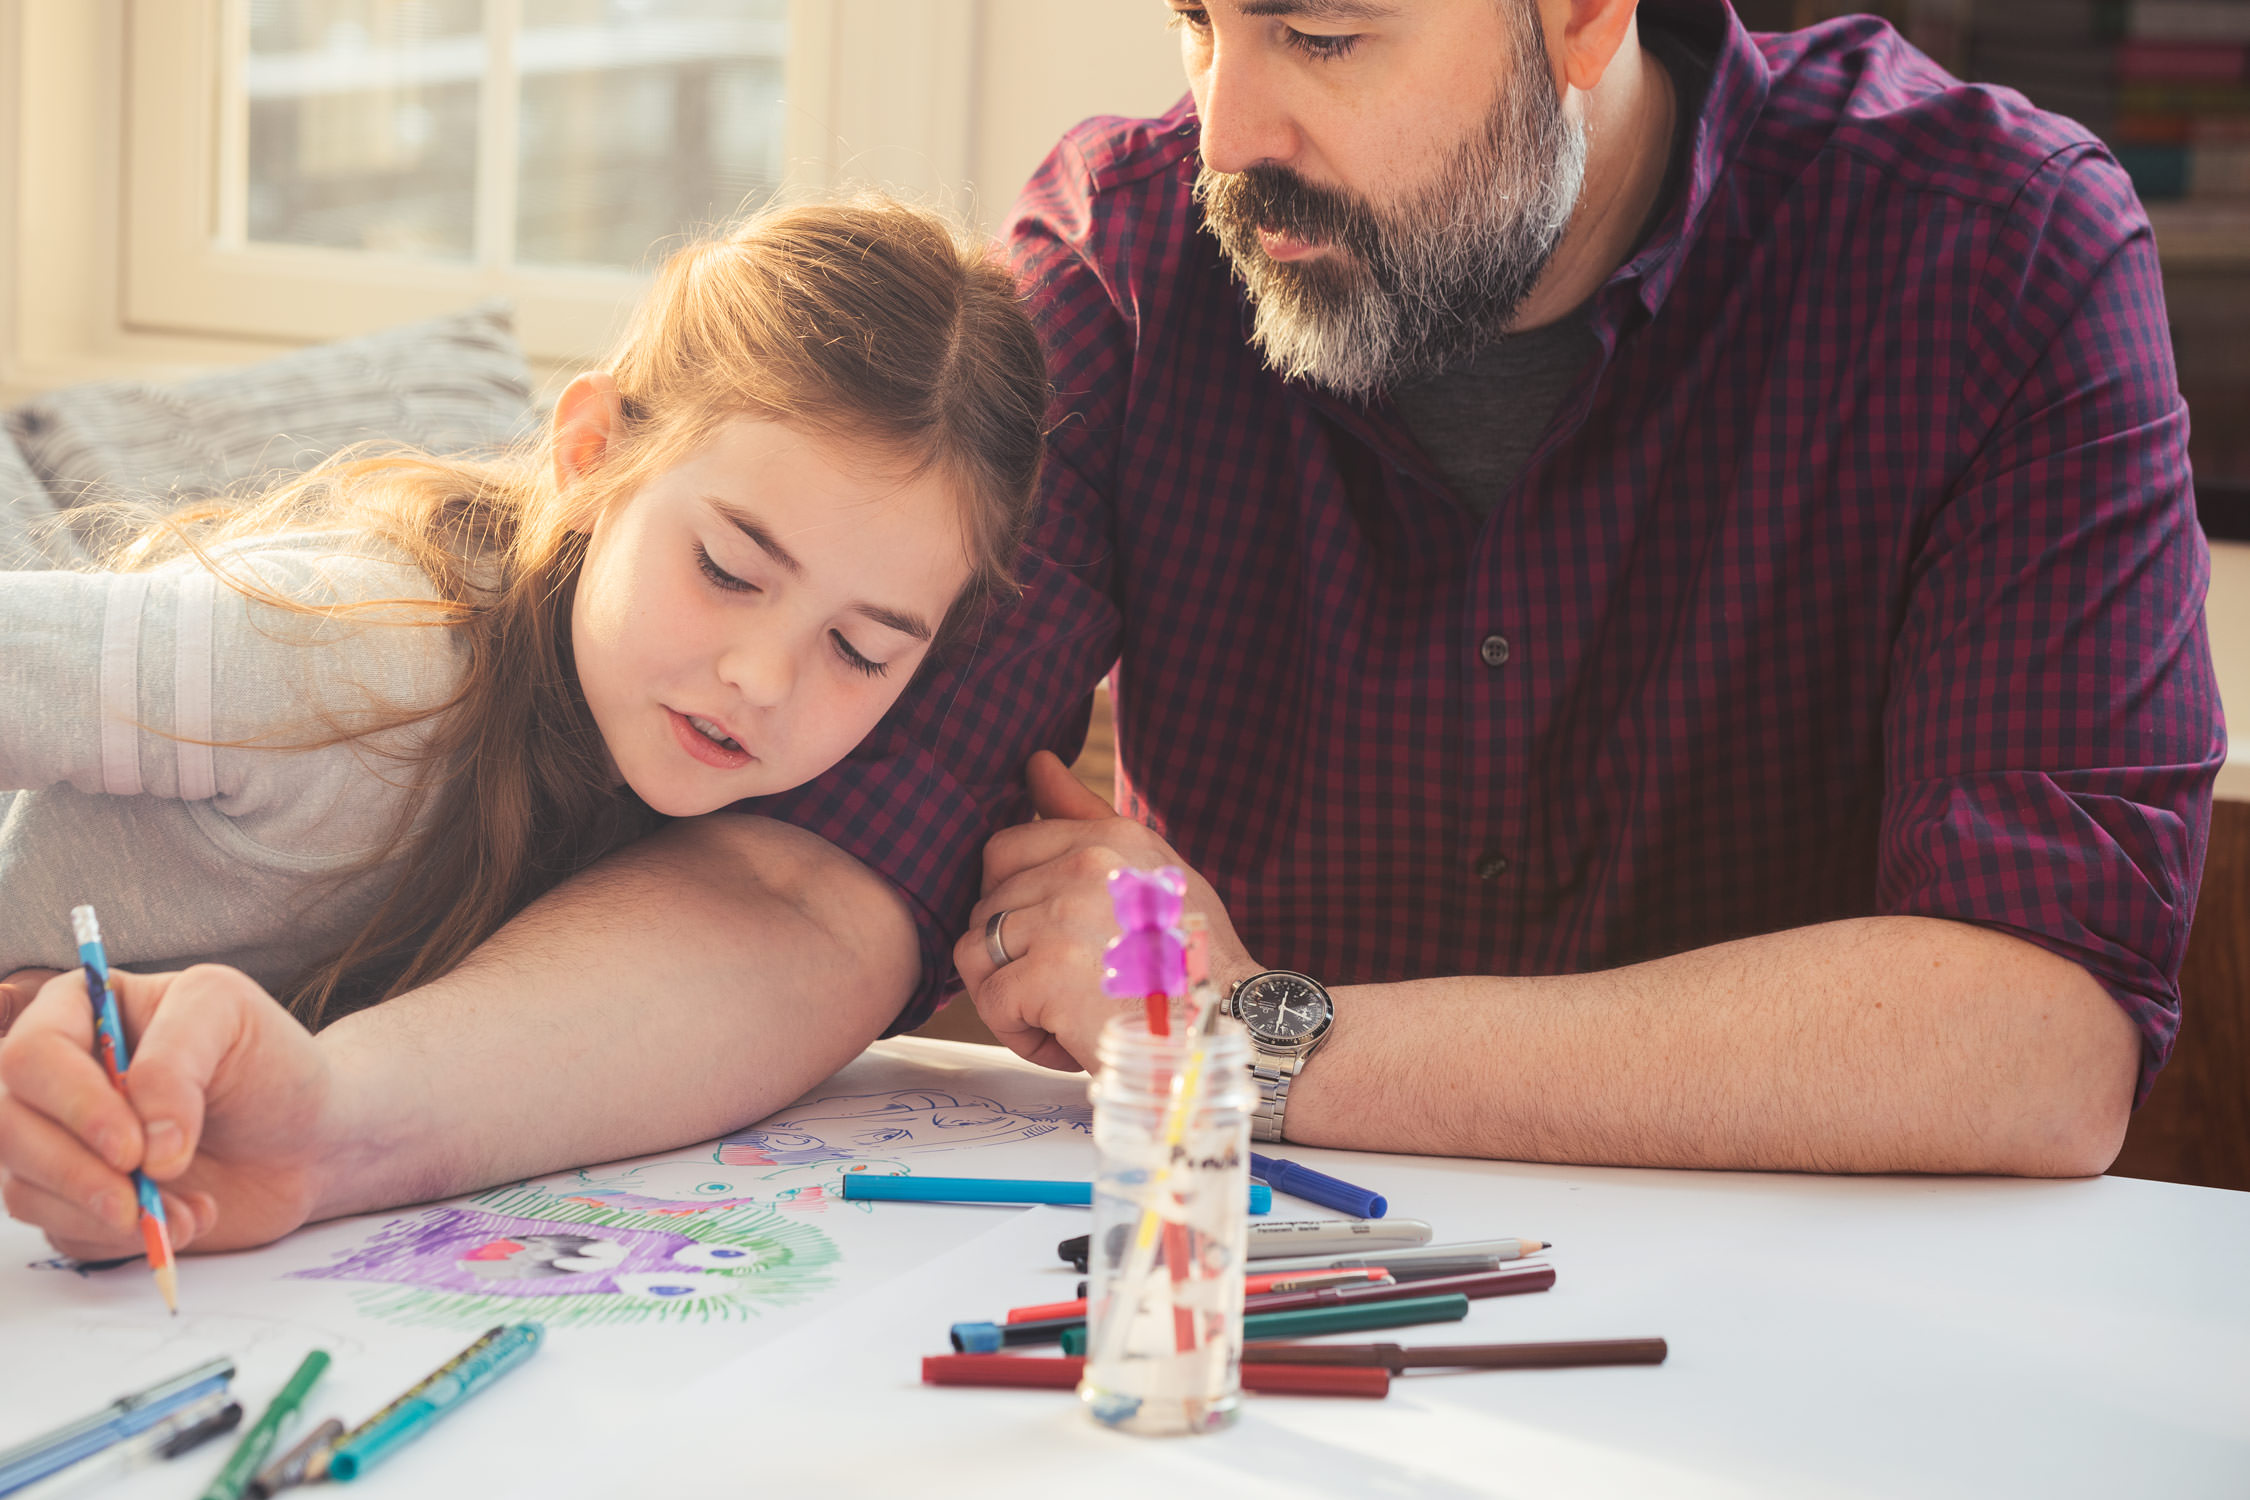 A father teaches his daughter to draw with markers on paper.